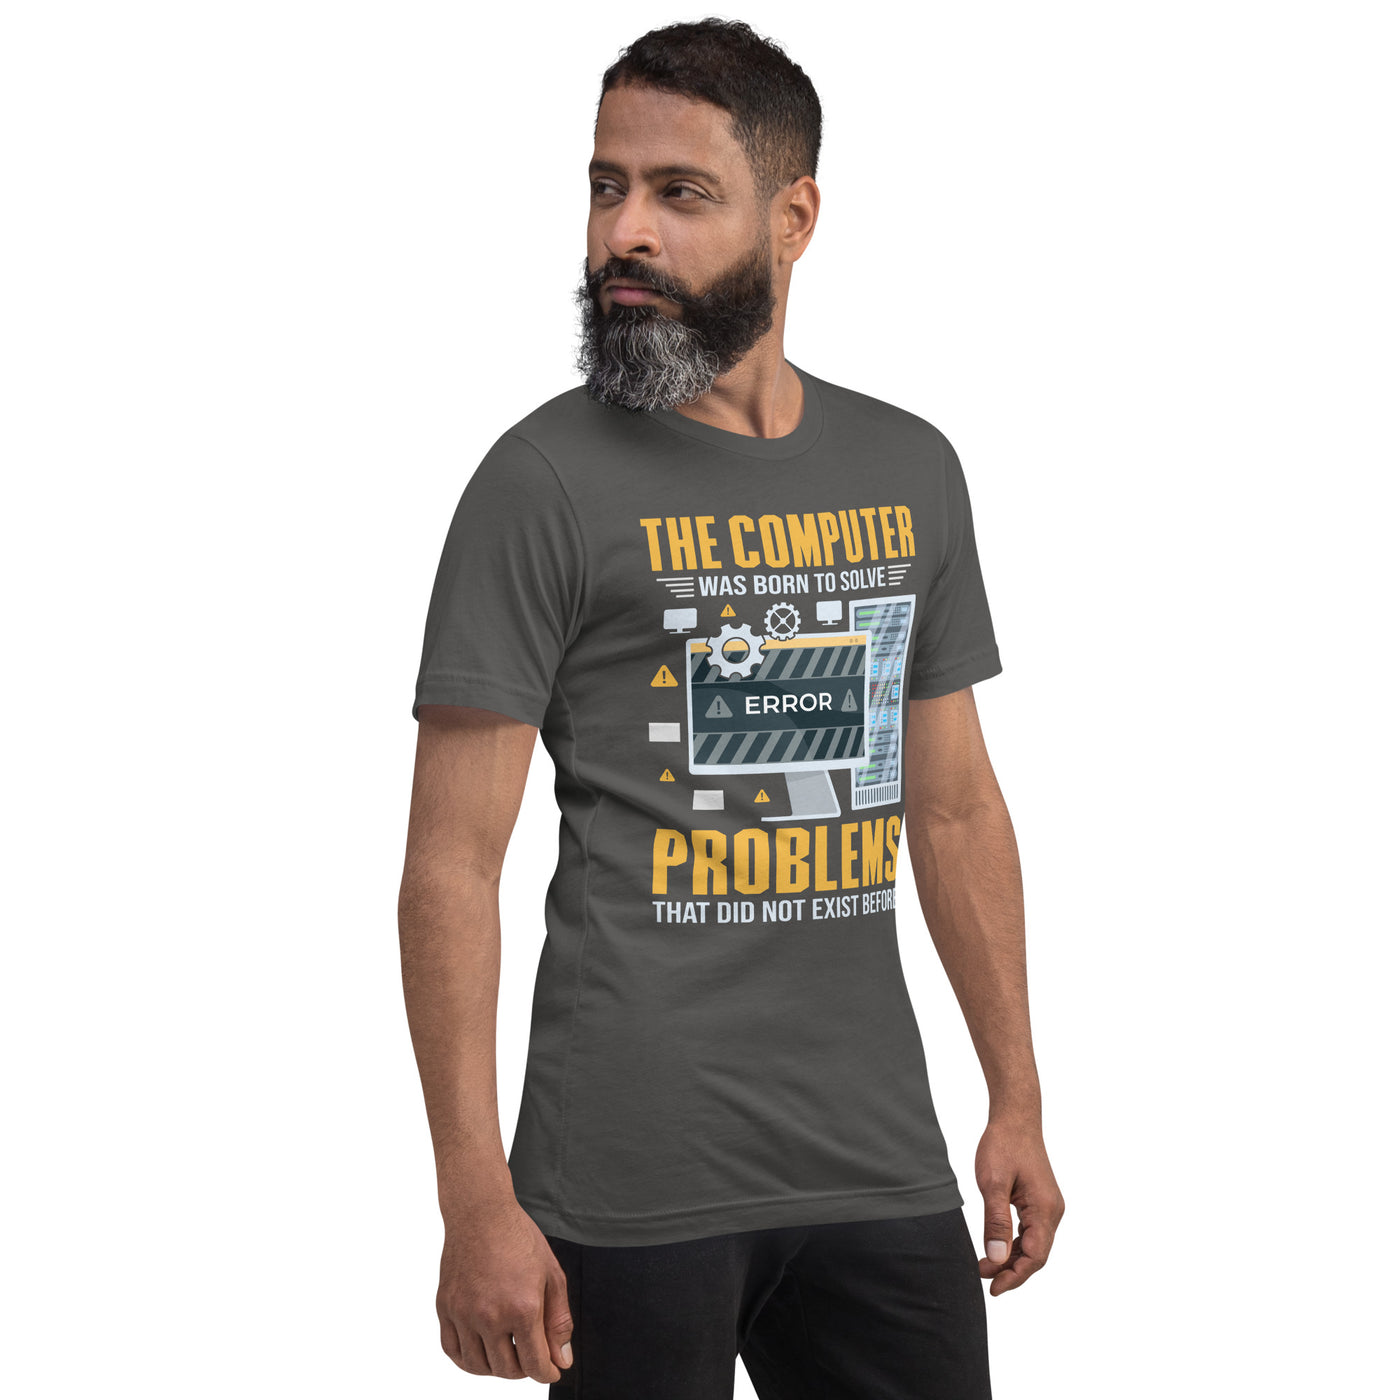 The Computer was born to solve the Problems that didn't exist before - Unisex t-shirt